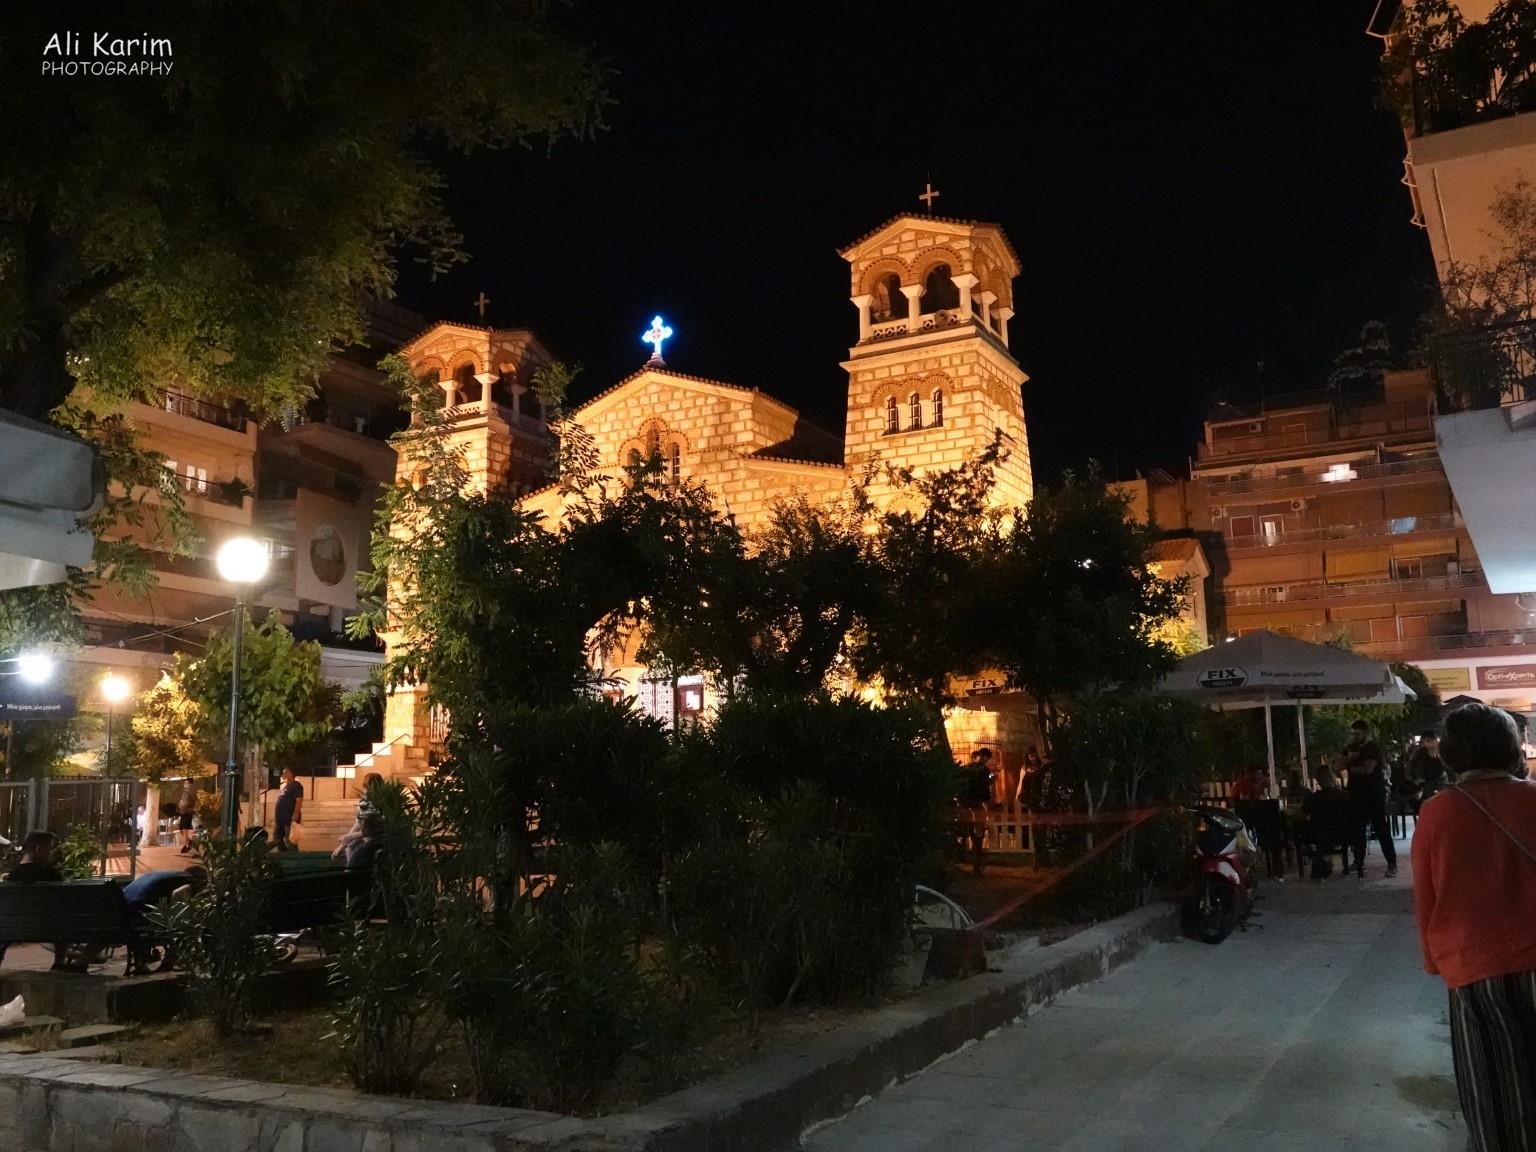 More Athens, Greece, May 2021, Strolling through the old city at night was delightful.